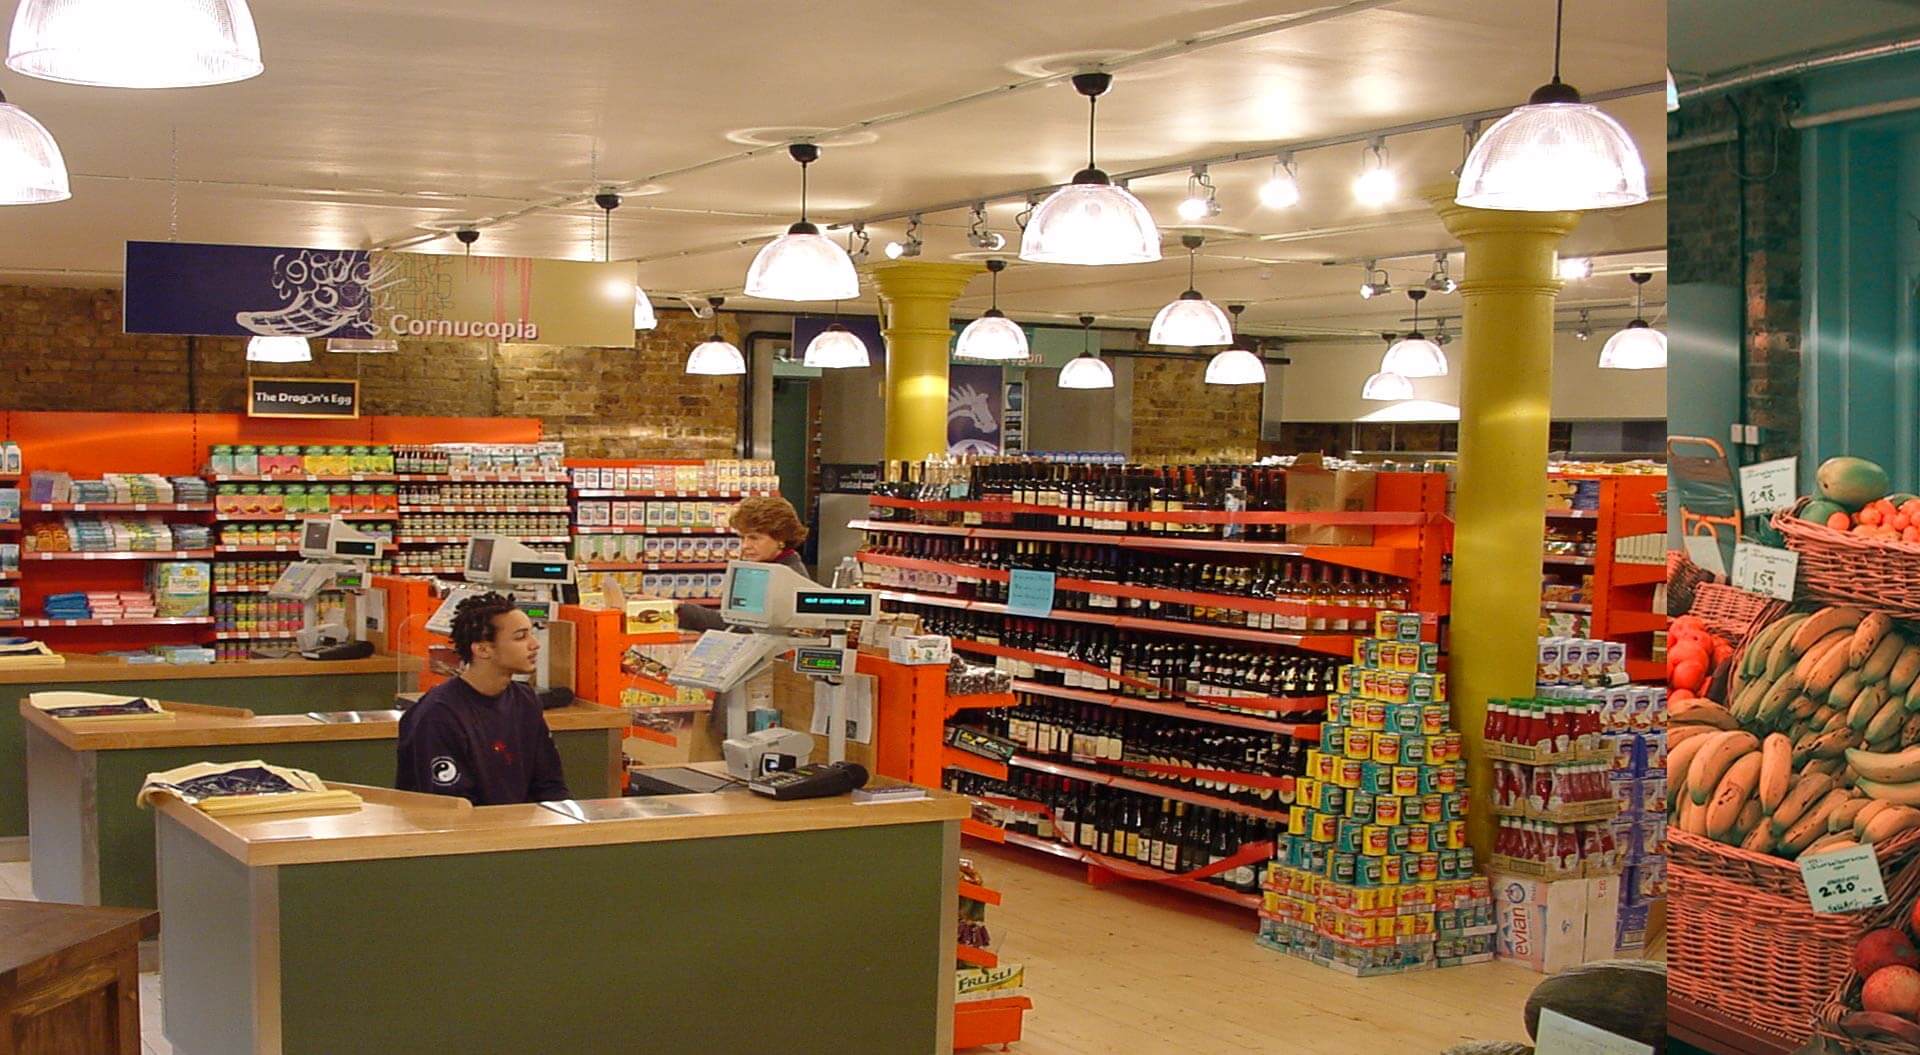 Sundace Organic supermarket interior design with checkout and branding